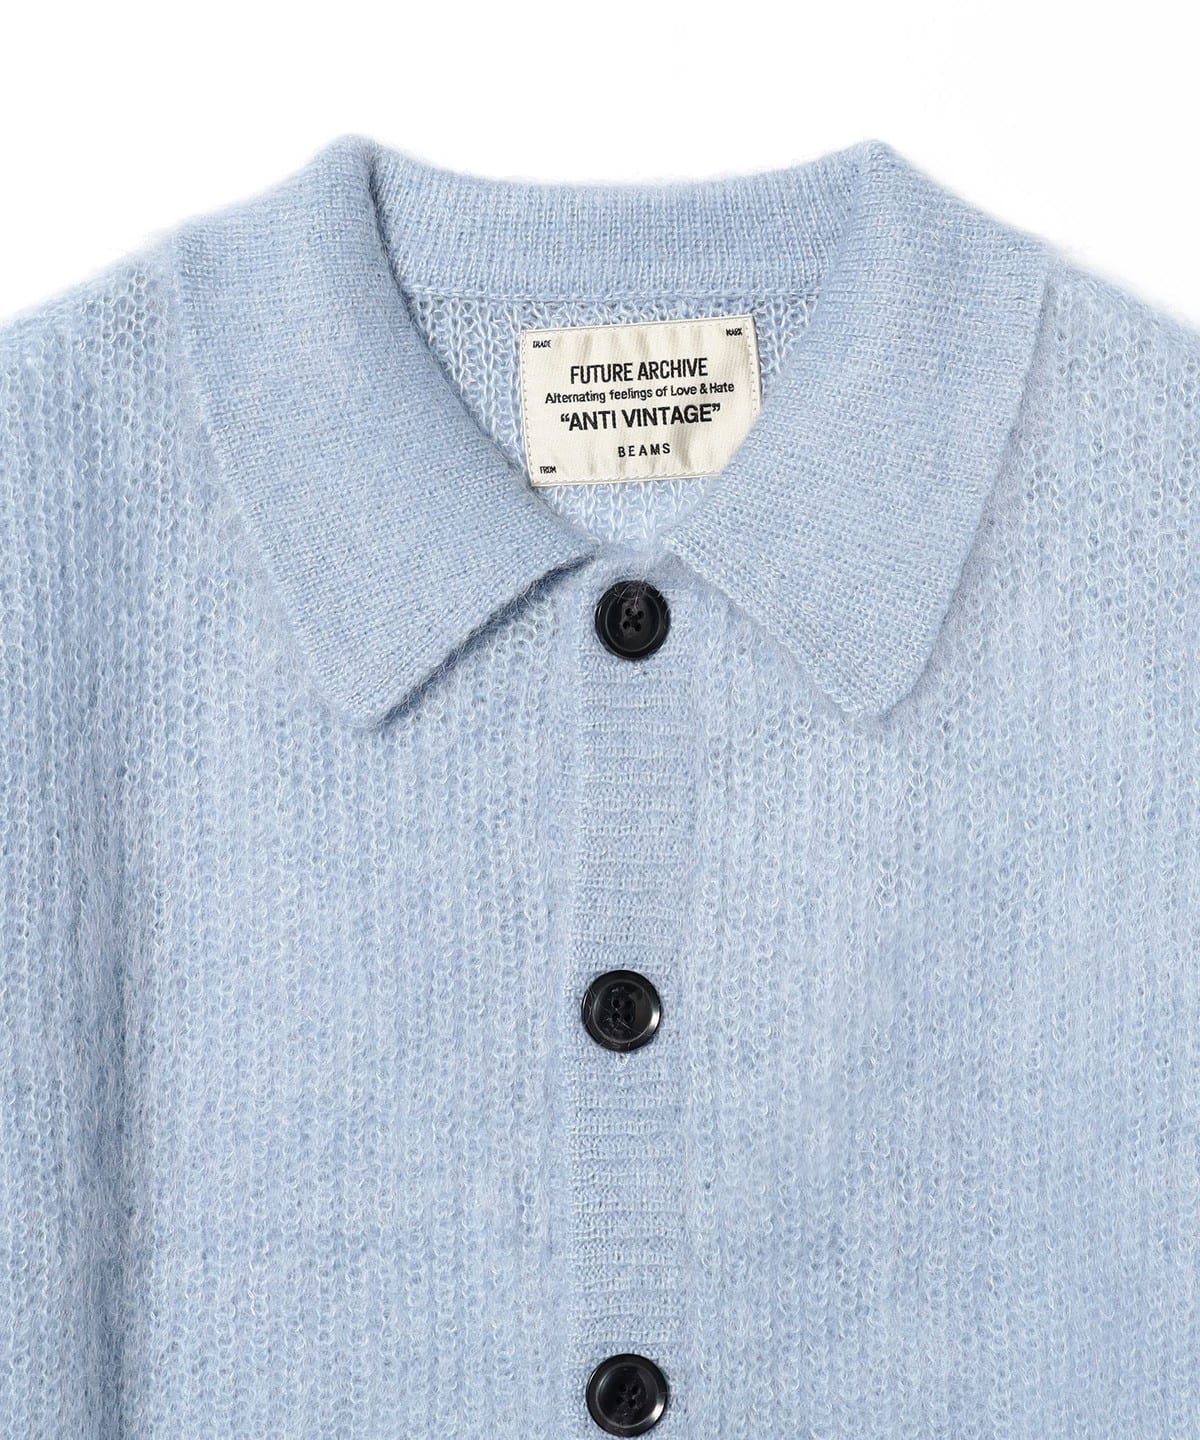 BEAMS FUTURE ARCHIVE / KNIT POLO (tops cardigan) mail order 